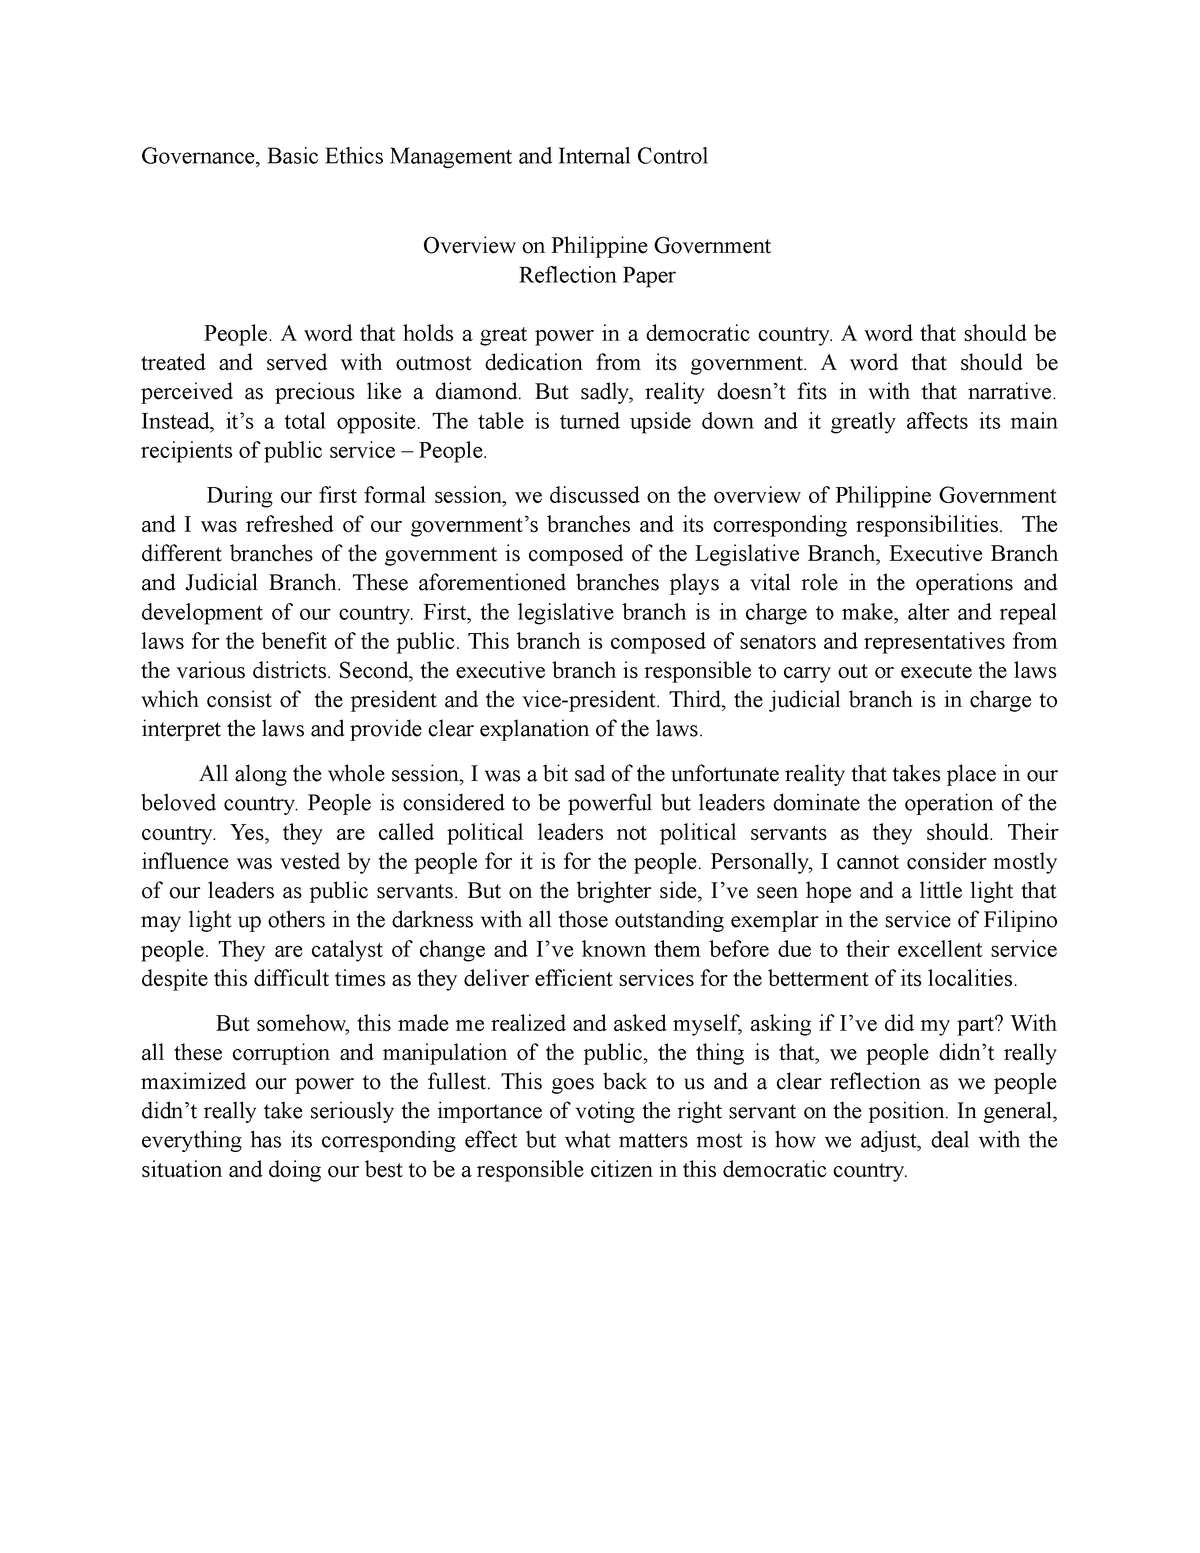 essay about philippine politics and governance